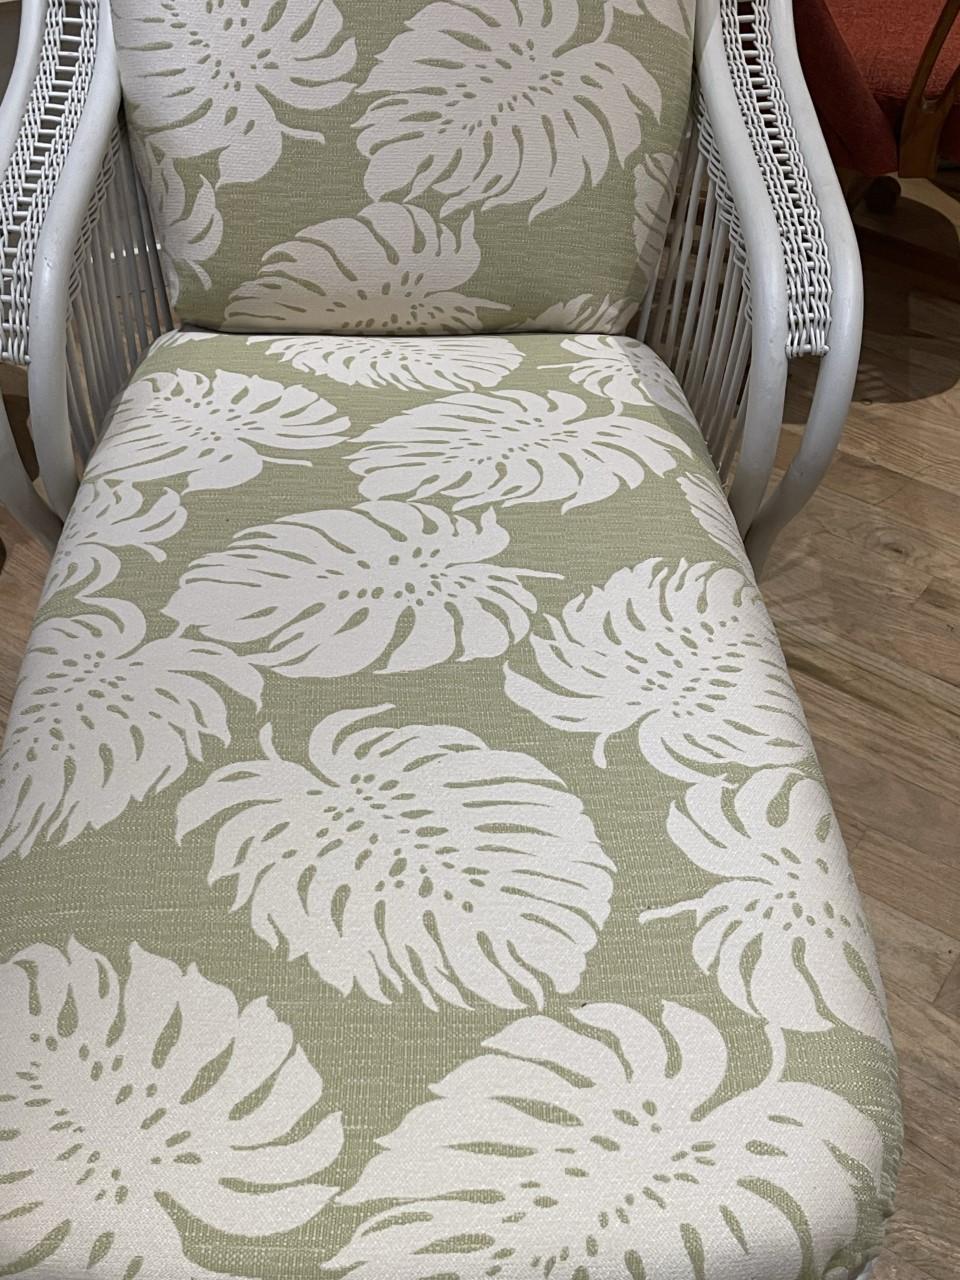 A newly upholstered Ficks and Reed chaise longue, indoor outdoor fabric, new fill in cushions, zippers installed. Lovely condition, easily placed in most settings.
F & R now in business for over 60 years, known for quality furniture.